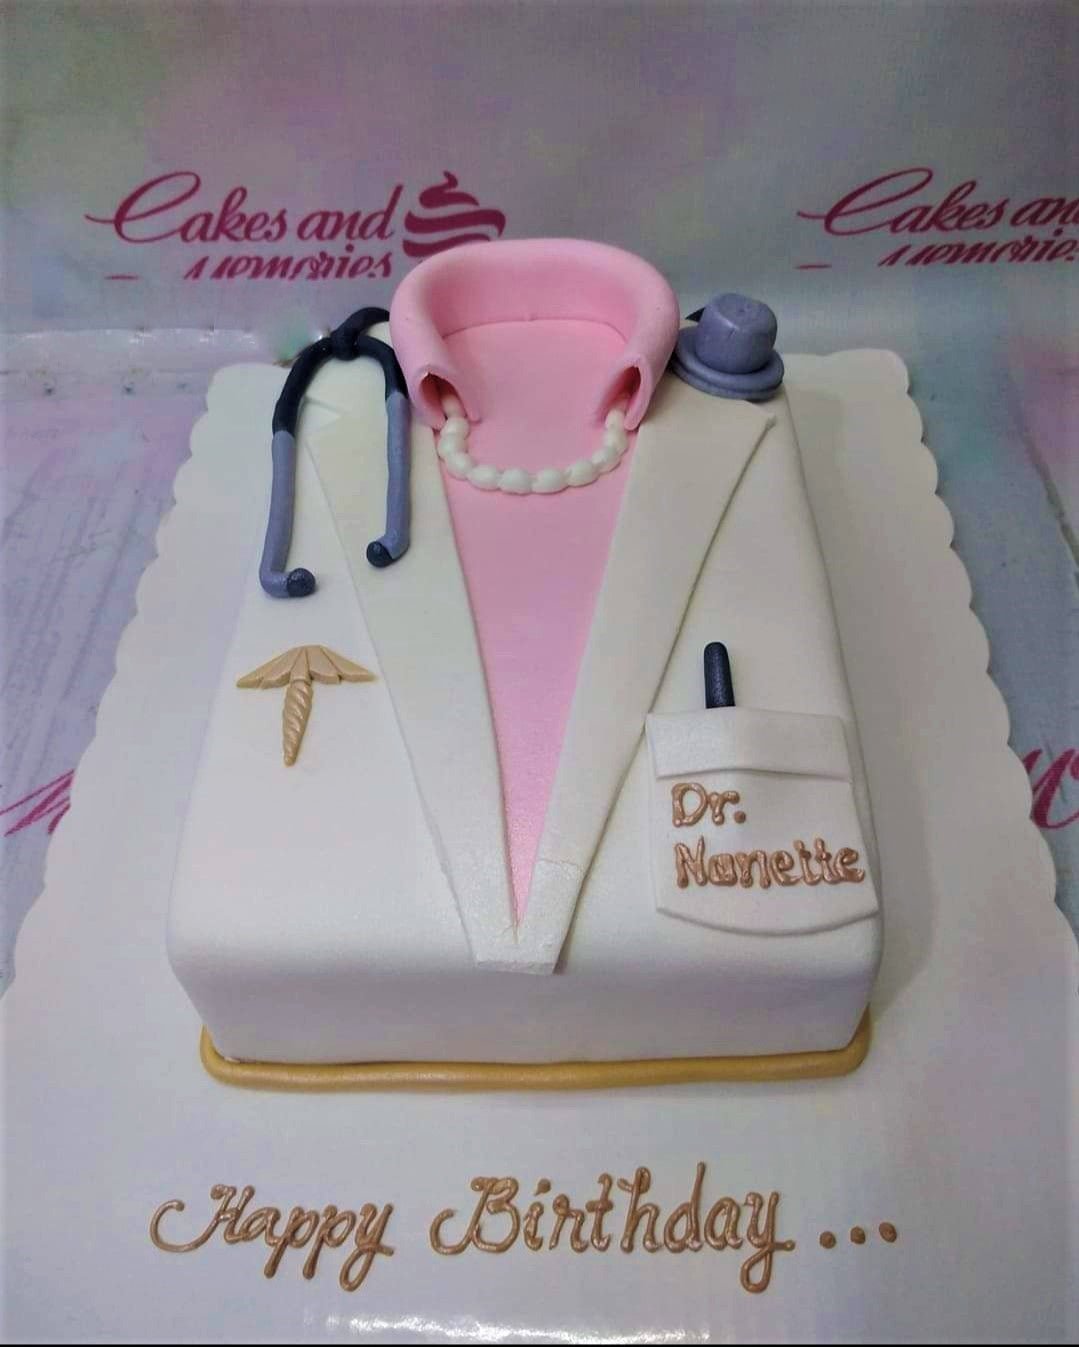 Working Doctor cake – Creme Castle